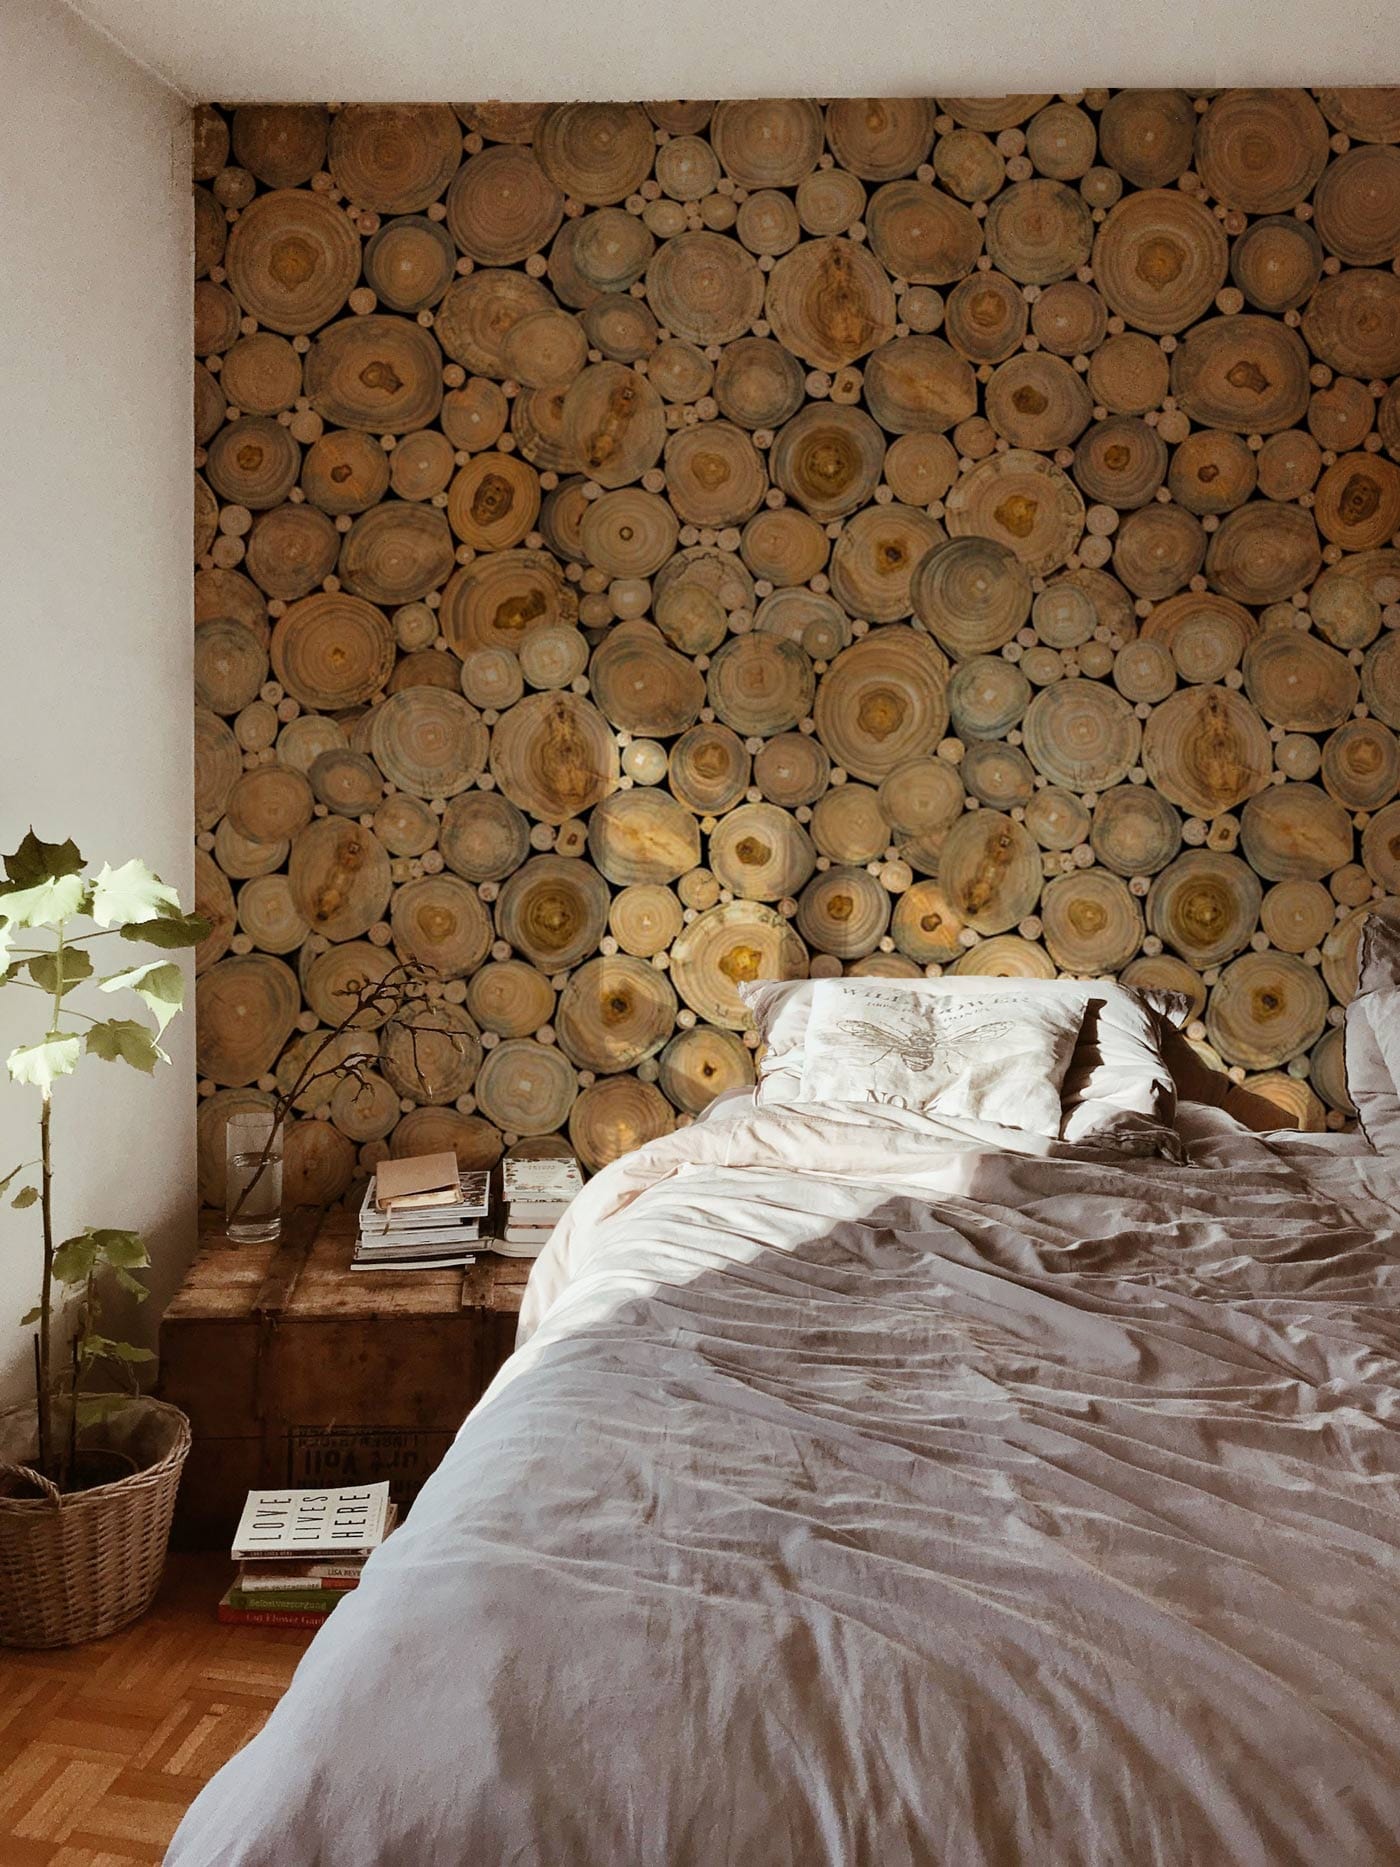 Wallpaper mural with a wood-grain pattern that may be used for decorating a bedroom.